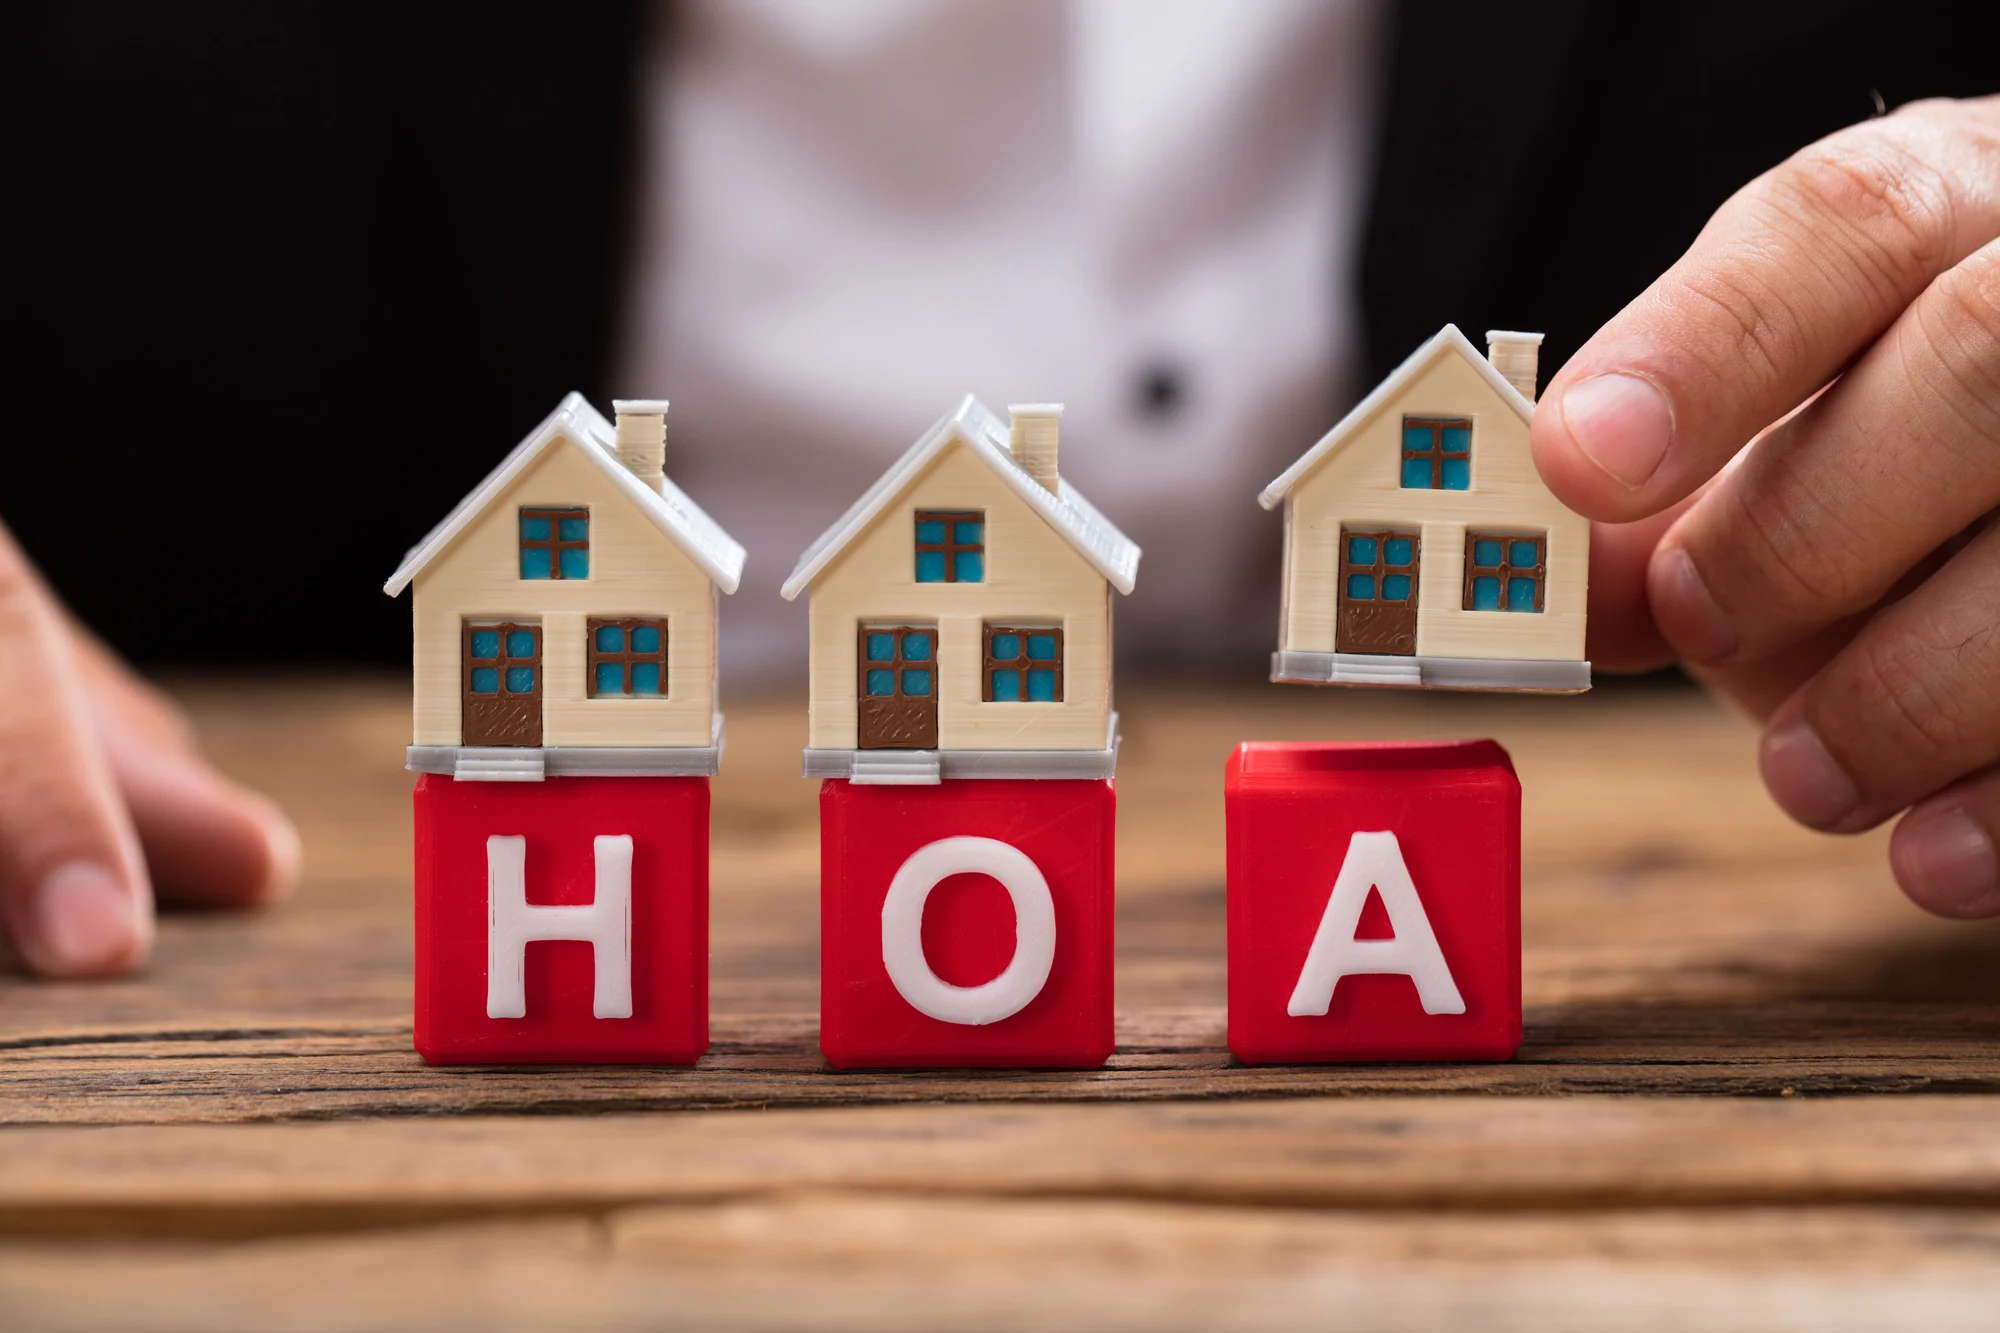 4 Reasons to Join Your HOA Board in Malta